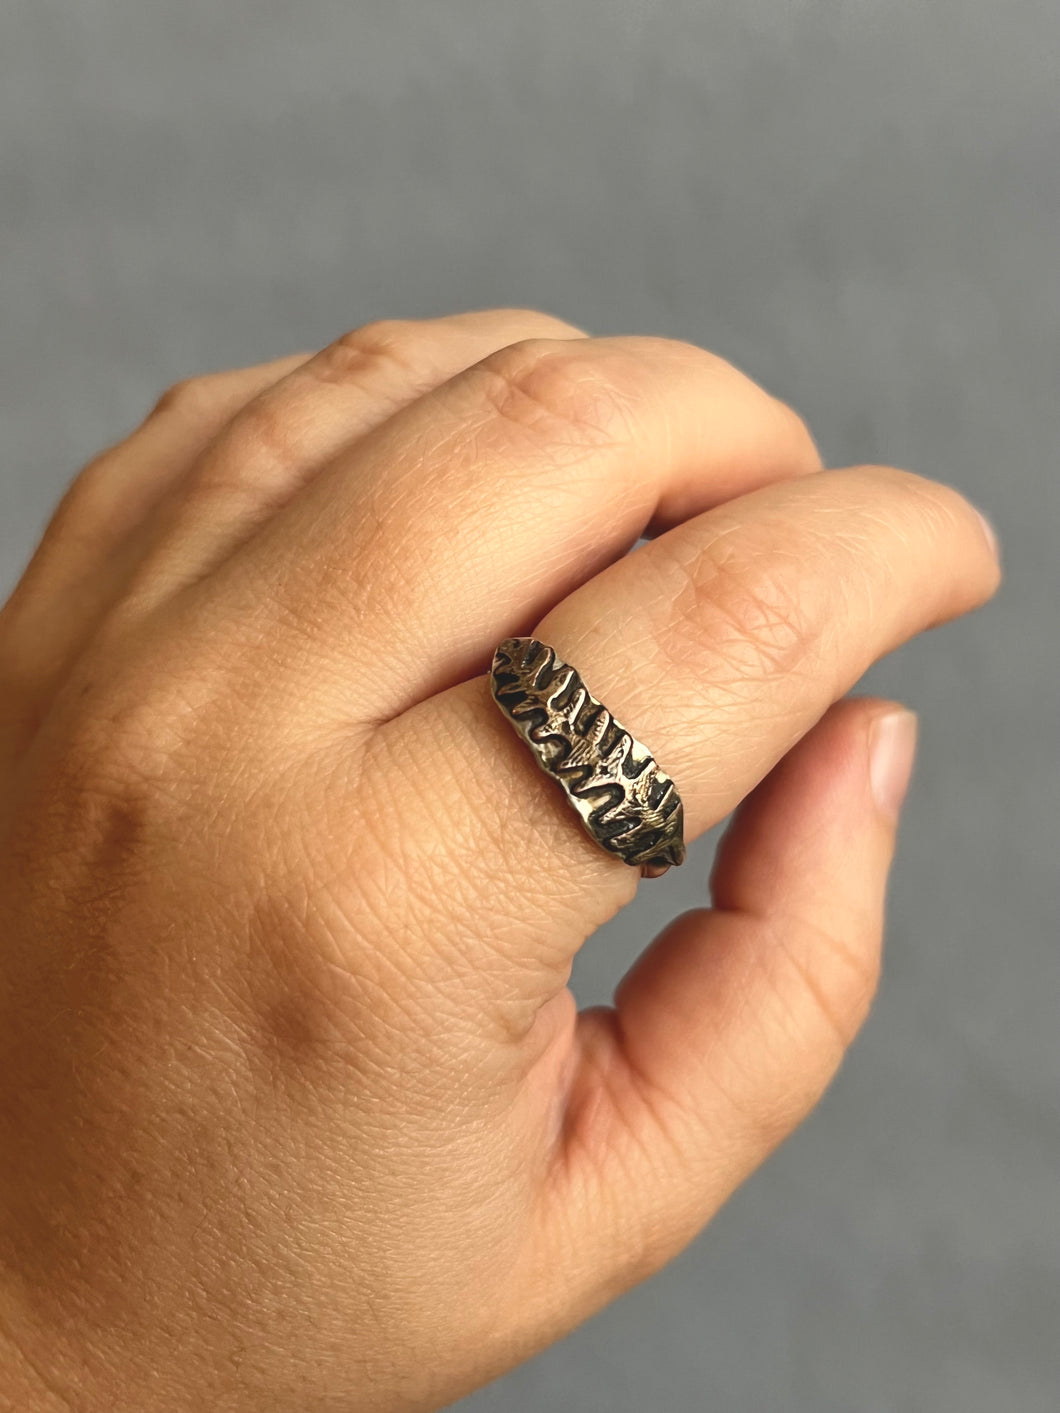 Fern Leaf Ring - Size 7.5 - Mixed Metal Copper & Sterling Silver